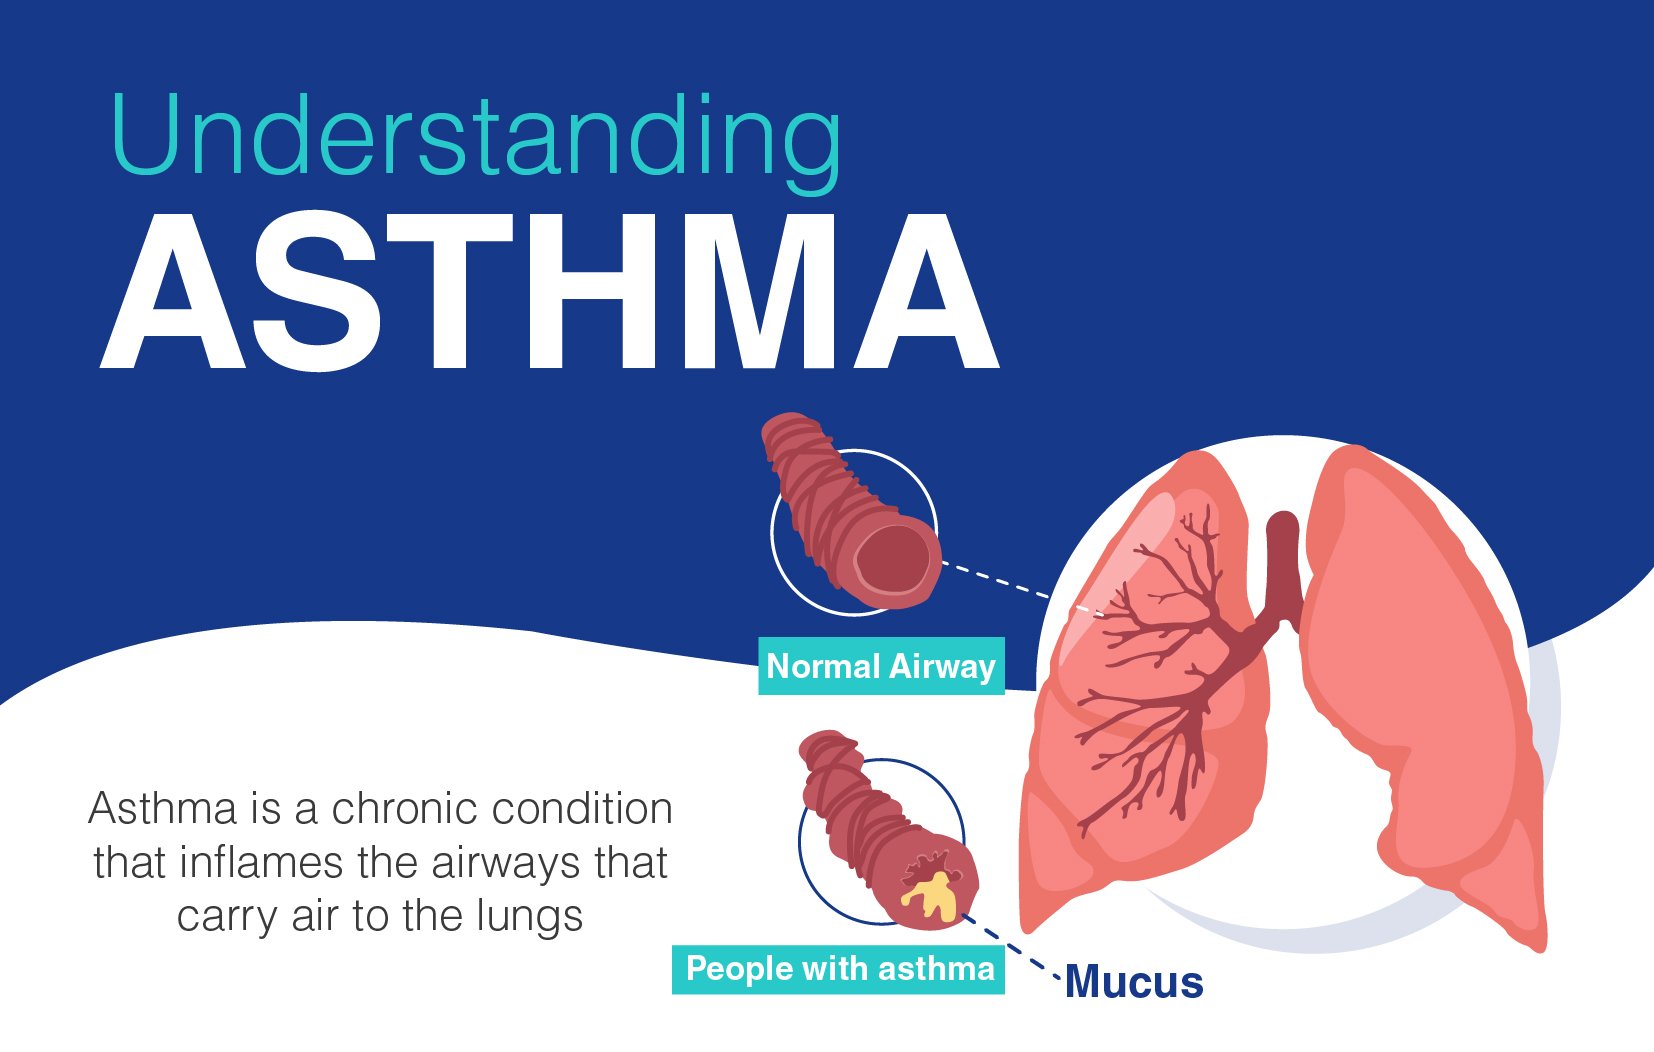 Overview of Asthma: Causes, Symptoms,Types, Risk Factors and its Treatment